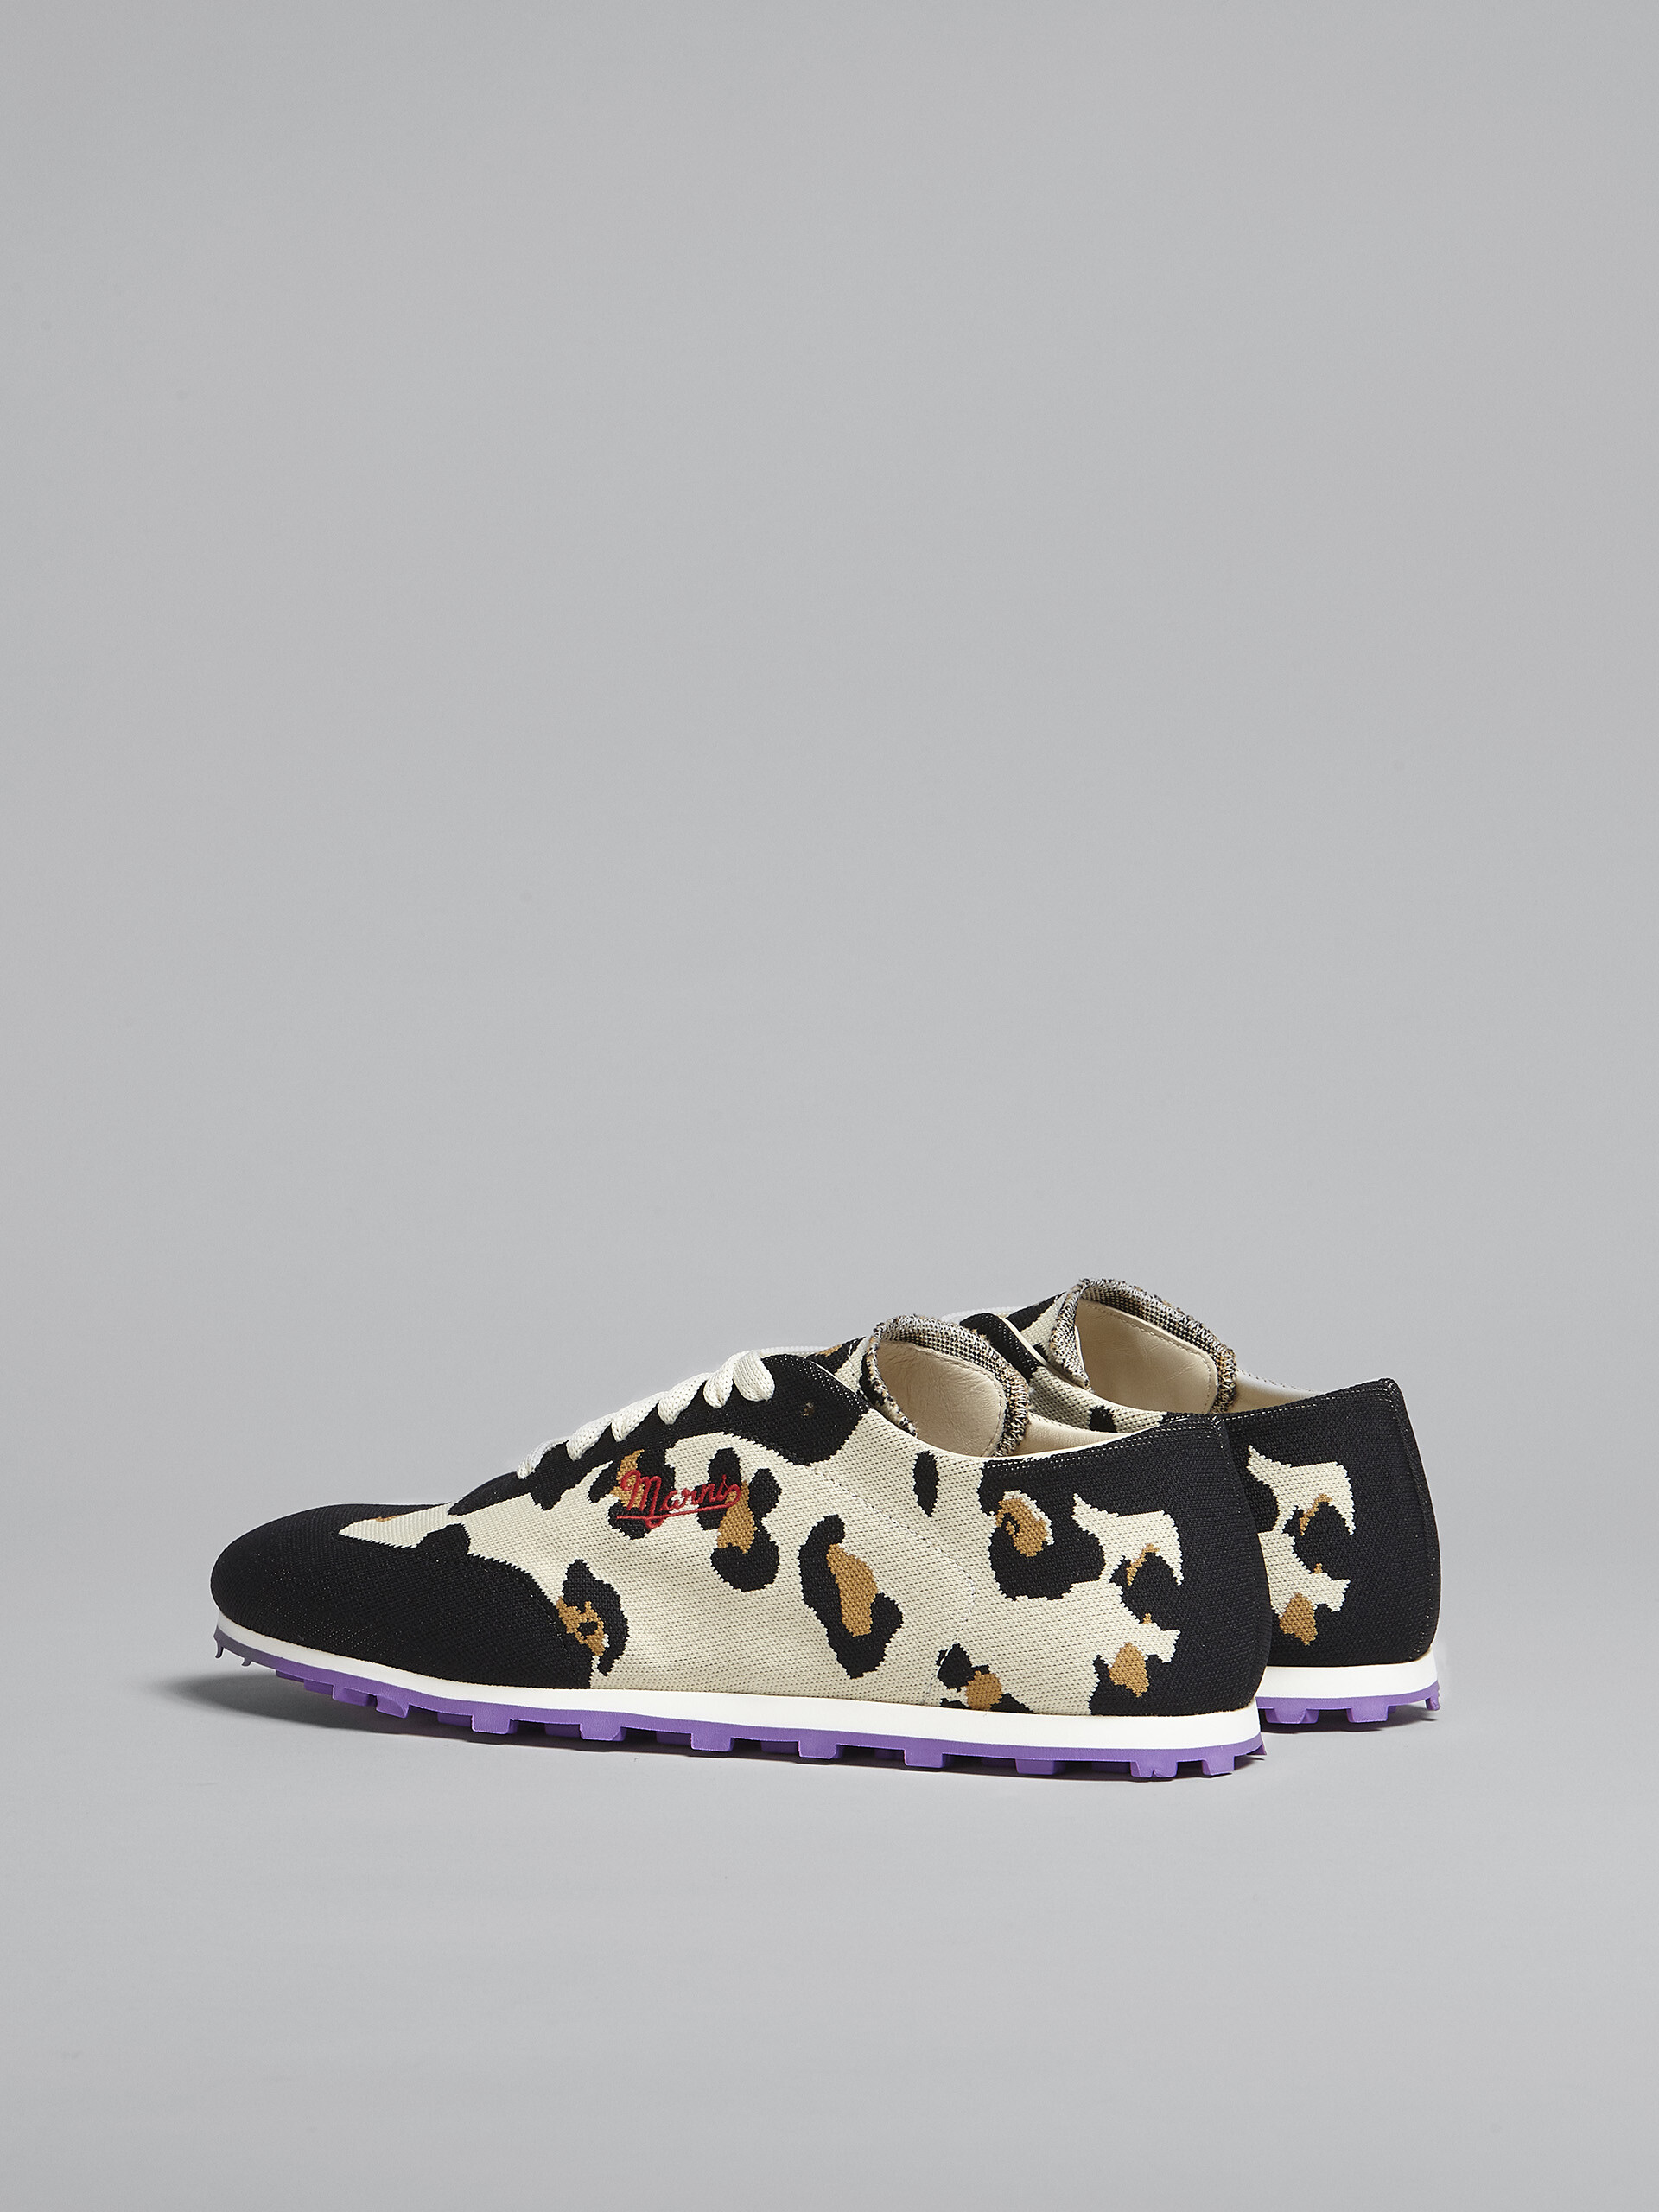 Low-Top Sneakers PEBBLE aus Stretch-Jacquard mit Leopardenmuster - Sneakers - Image 3